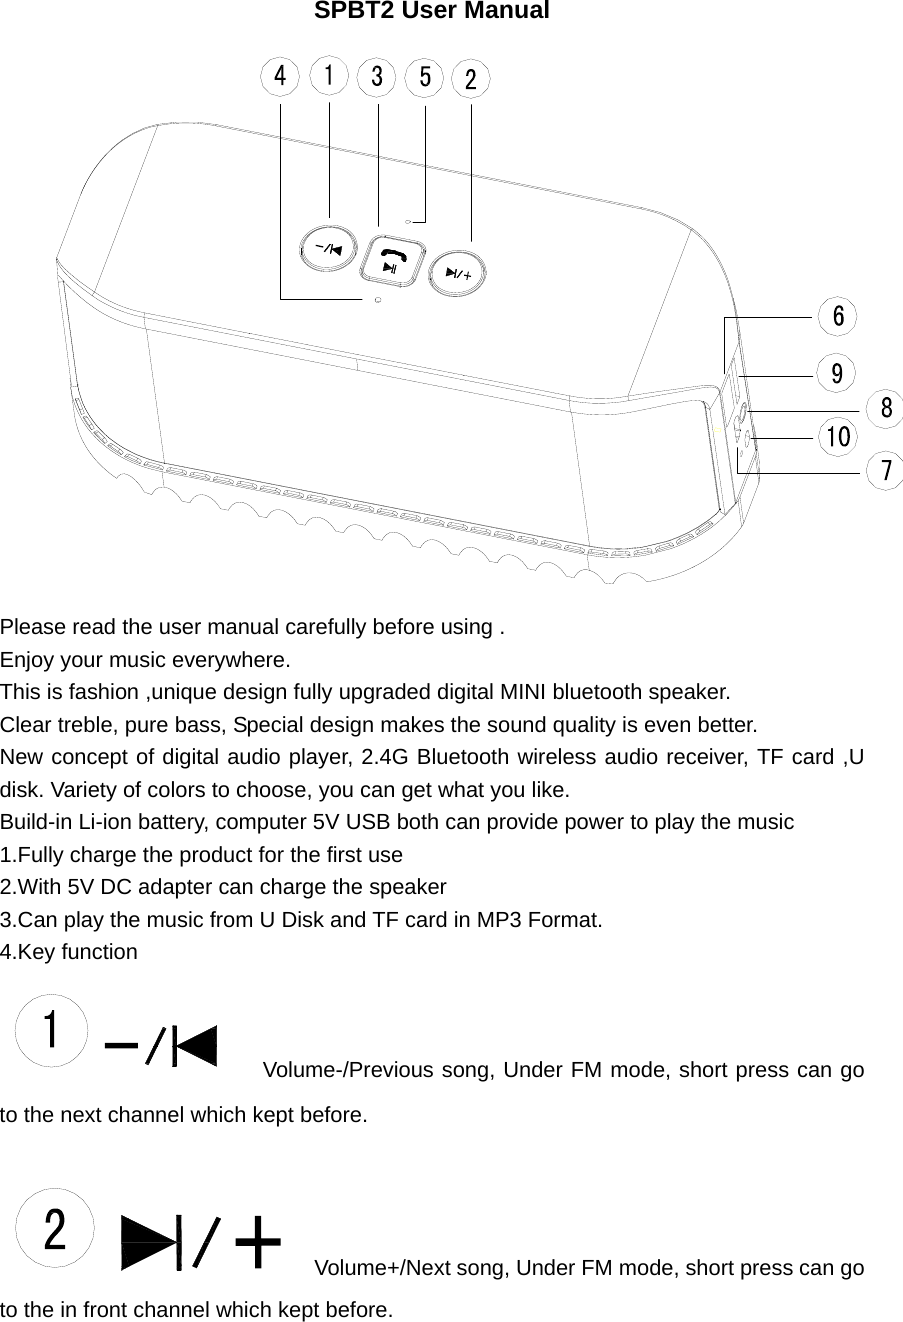 SPBT2 User Manual  Please read the user manual carefully before using . Enjoy your music everywhere. This is fashion ,unique design fully upgraded digital MINI bluetooth speaker. Clear treble, pure bass, Special design makes the sound quality is even better. New concept of digital audio player, 2.4G Bluetooth wireless audio receiver, TF card ,U disk. Variety of colors to choose, you can get what you like. Build-in Li-ion battery, computer 5V USB both can provide power to play the music 1.Fully charge the product for the first use 2.With 5V DC adapter can charge the speaker 3.Can play the music from U Disk and TF card in MP3 Format. 4.Key function   Volume-/Previous song, Under FM mode, short press can go to the next channel which kept before.     Volume+/Next song, Under FM mode, short press can go to the in front channel which kept before.  